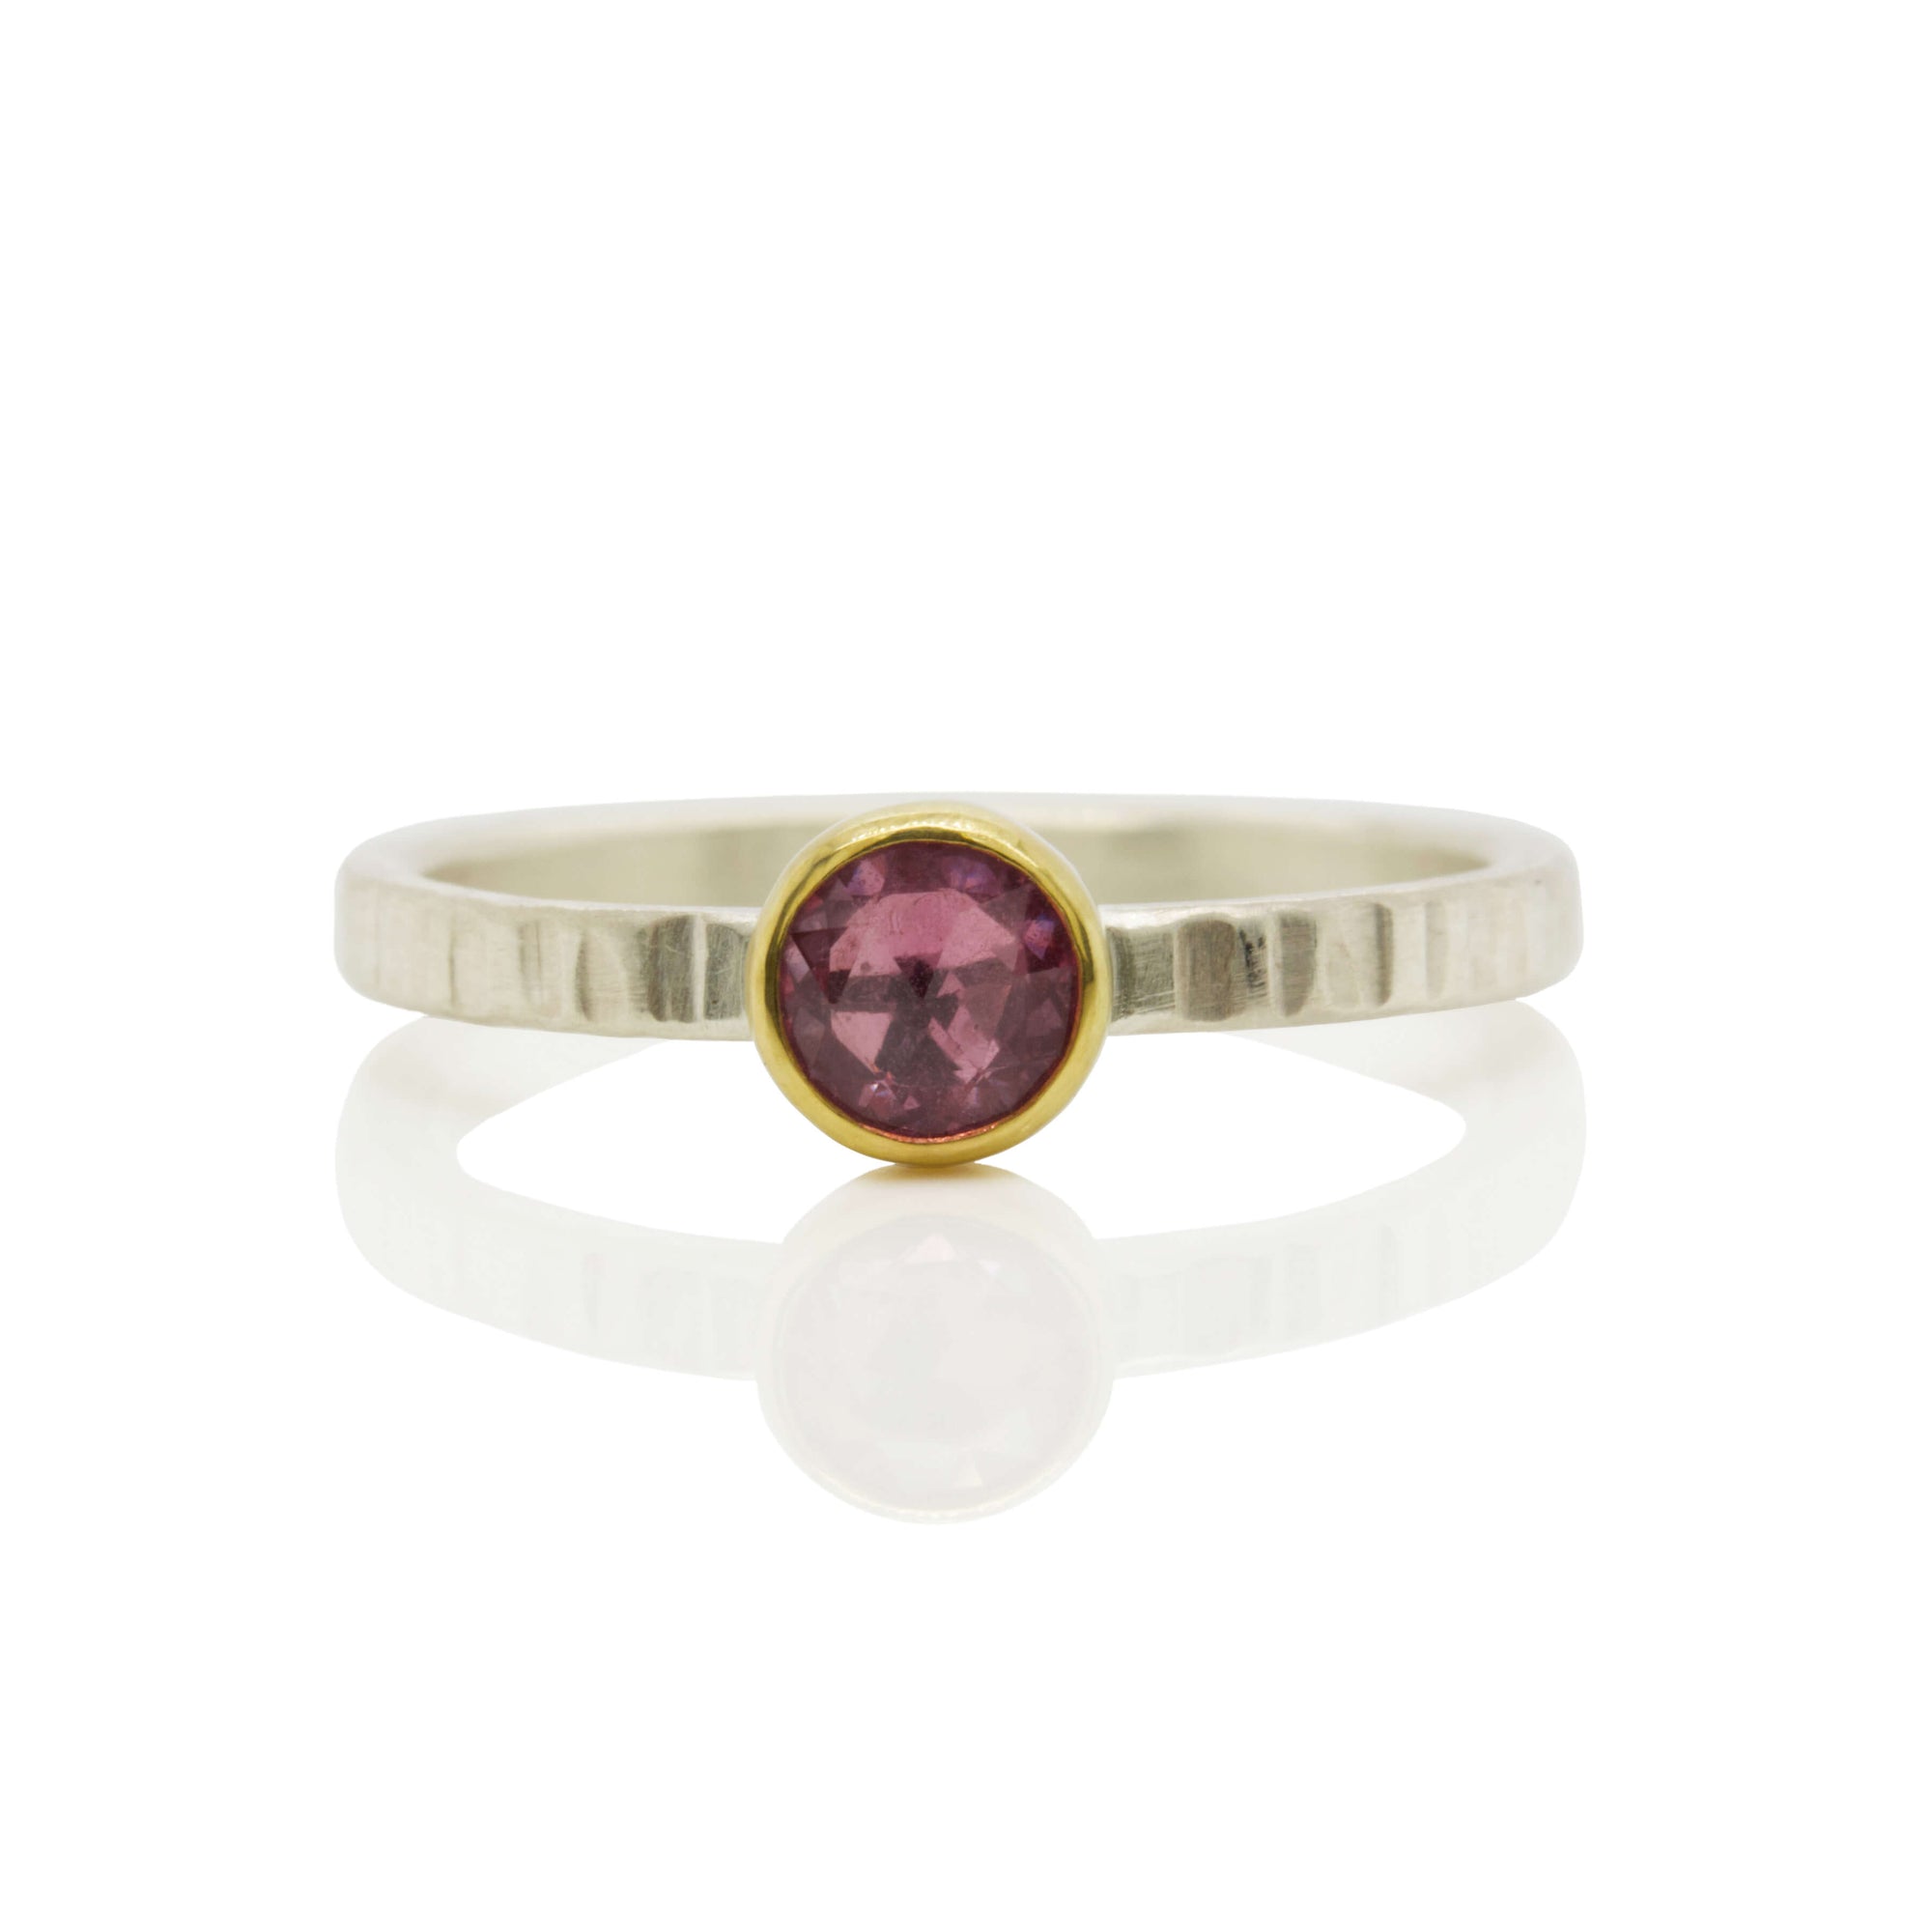 Rose Cut Pink Sapphire Ring in Yellow Gold and Silver